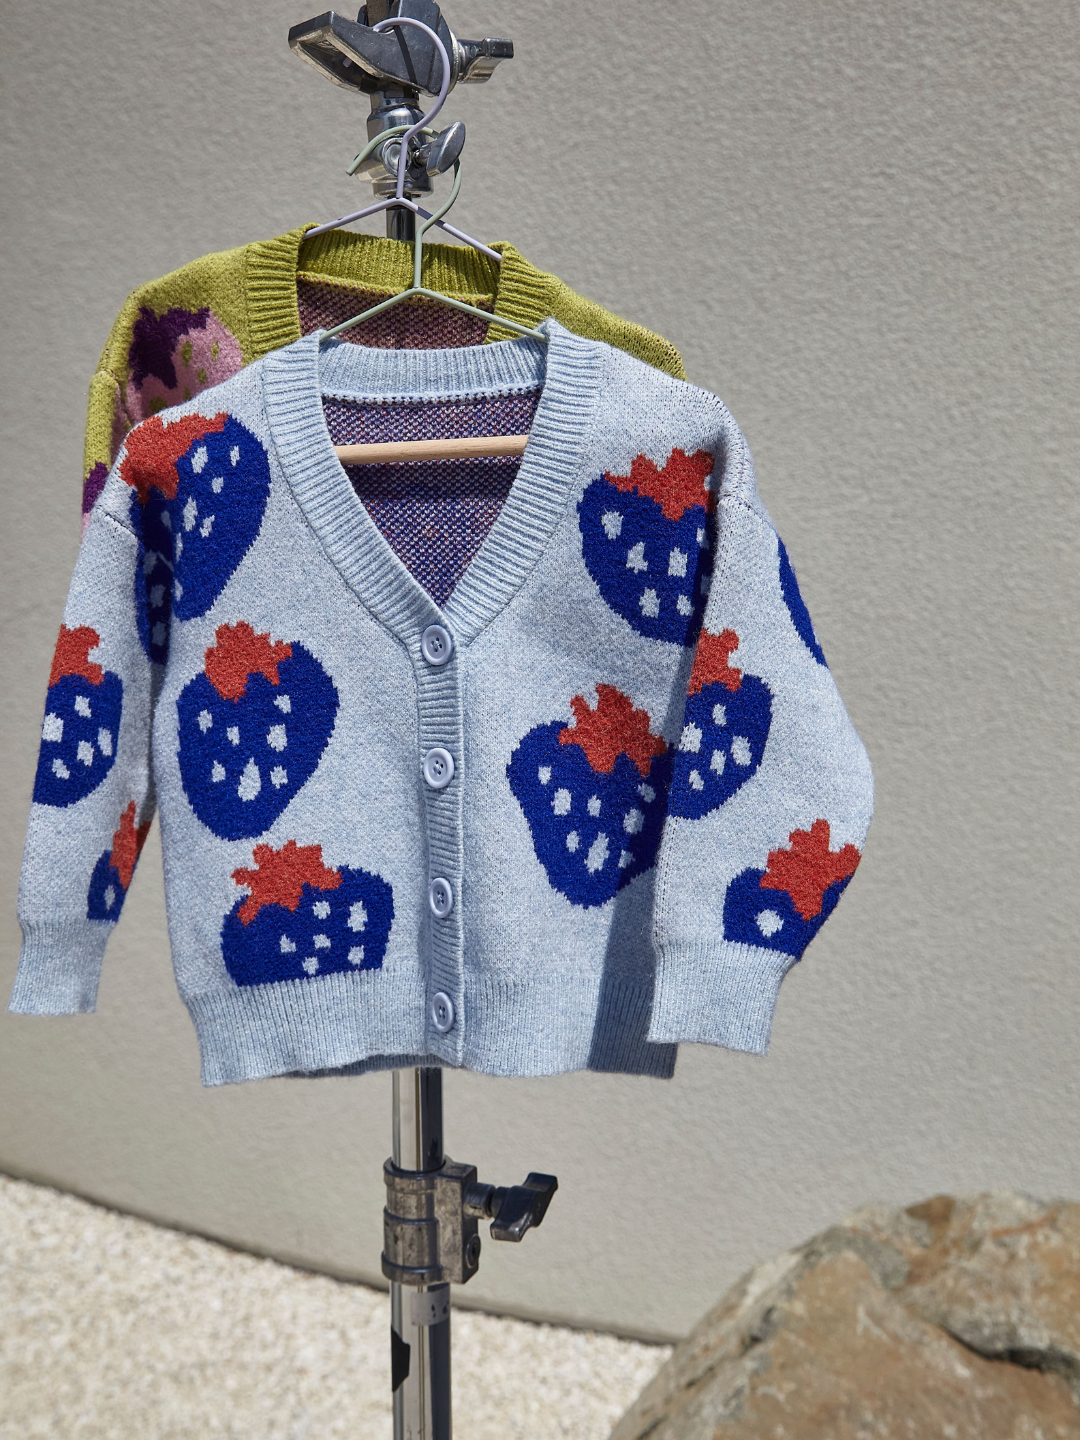 Sky | Two kids v-neck cardigans, shown on hangers, hanging from a metal photography stand, in an outdoor space with a gravel floor and grey wall. The cardigan in front is light blue with an all-over pattern of large blue strawberries with a red leaf. The cardigan behind is green with a pink strawberry with a purple leaf.